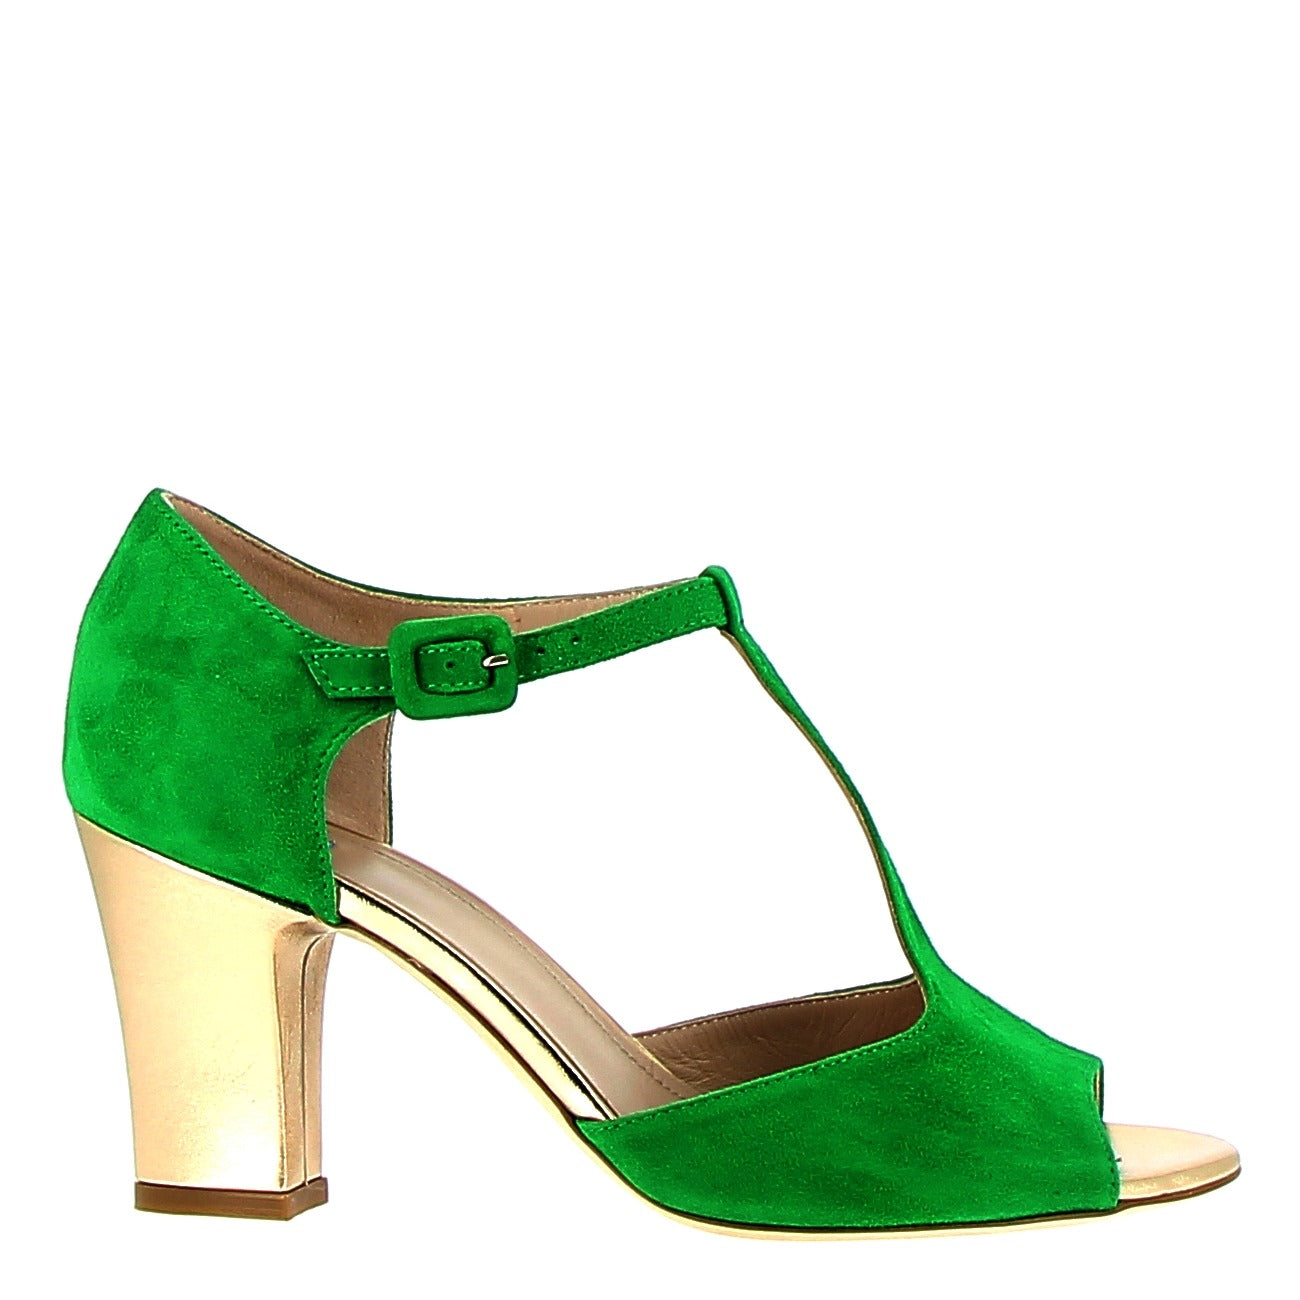 Green suede sandal with gold heel